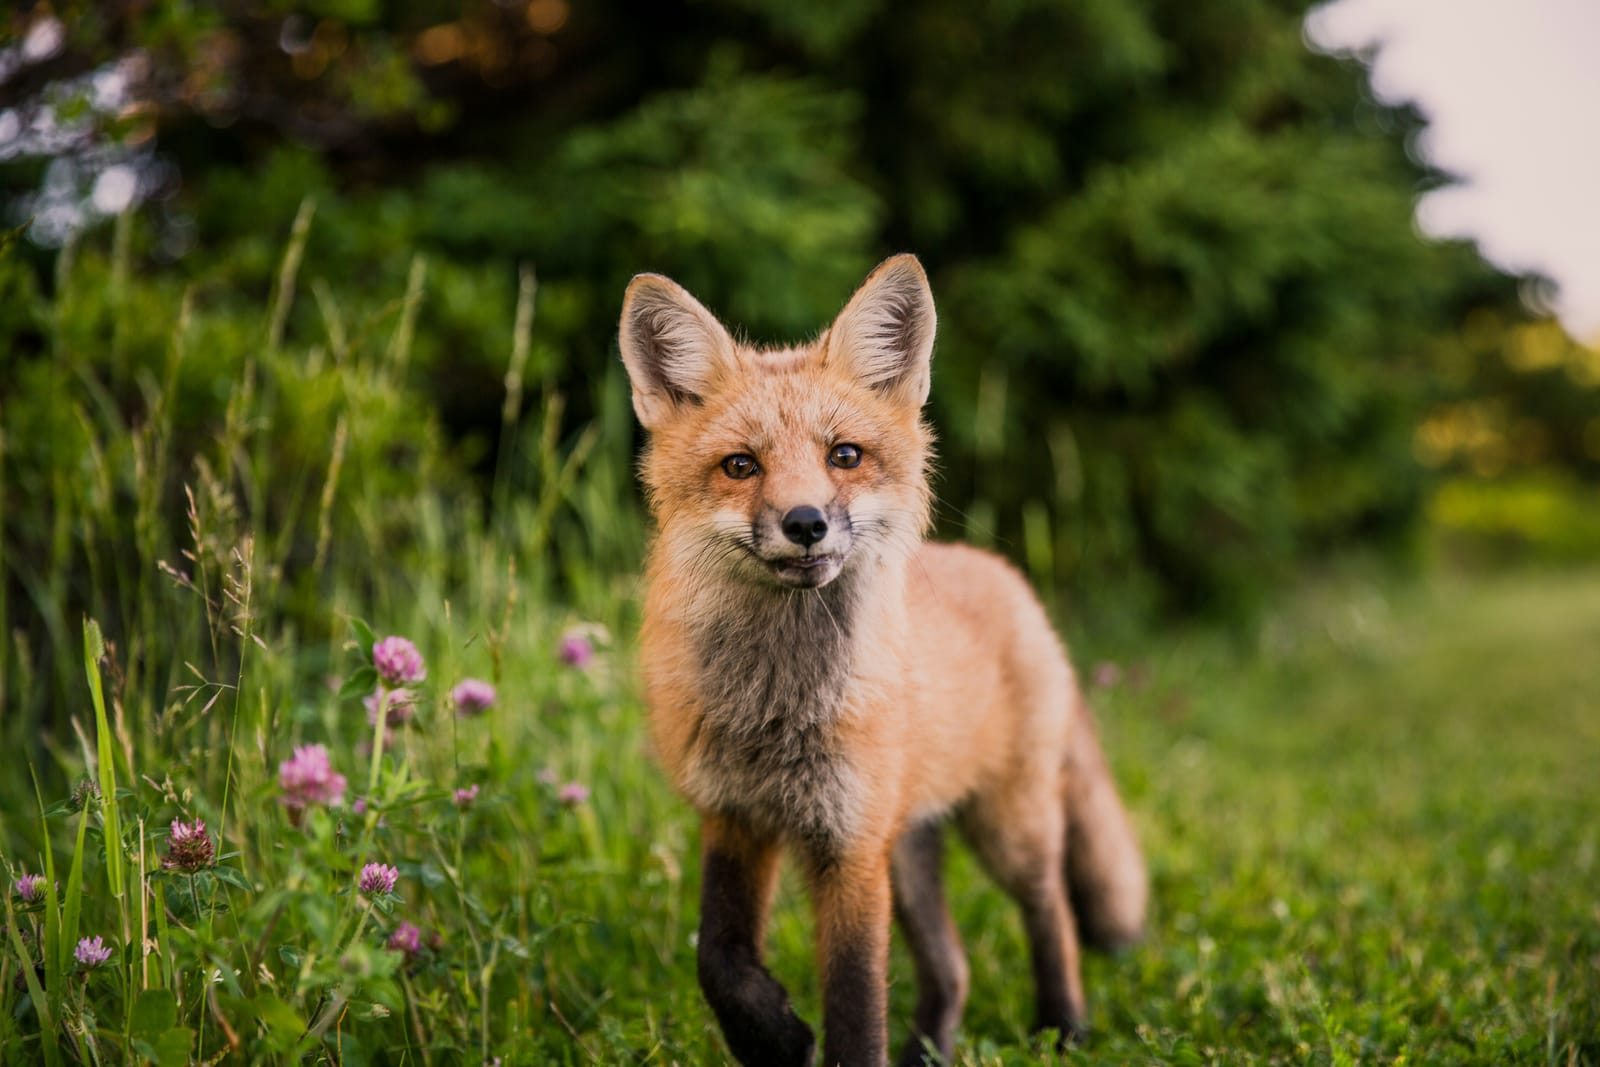 Photo of a young fox cub in a garden at dusk